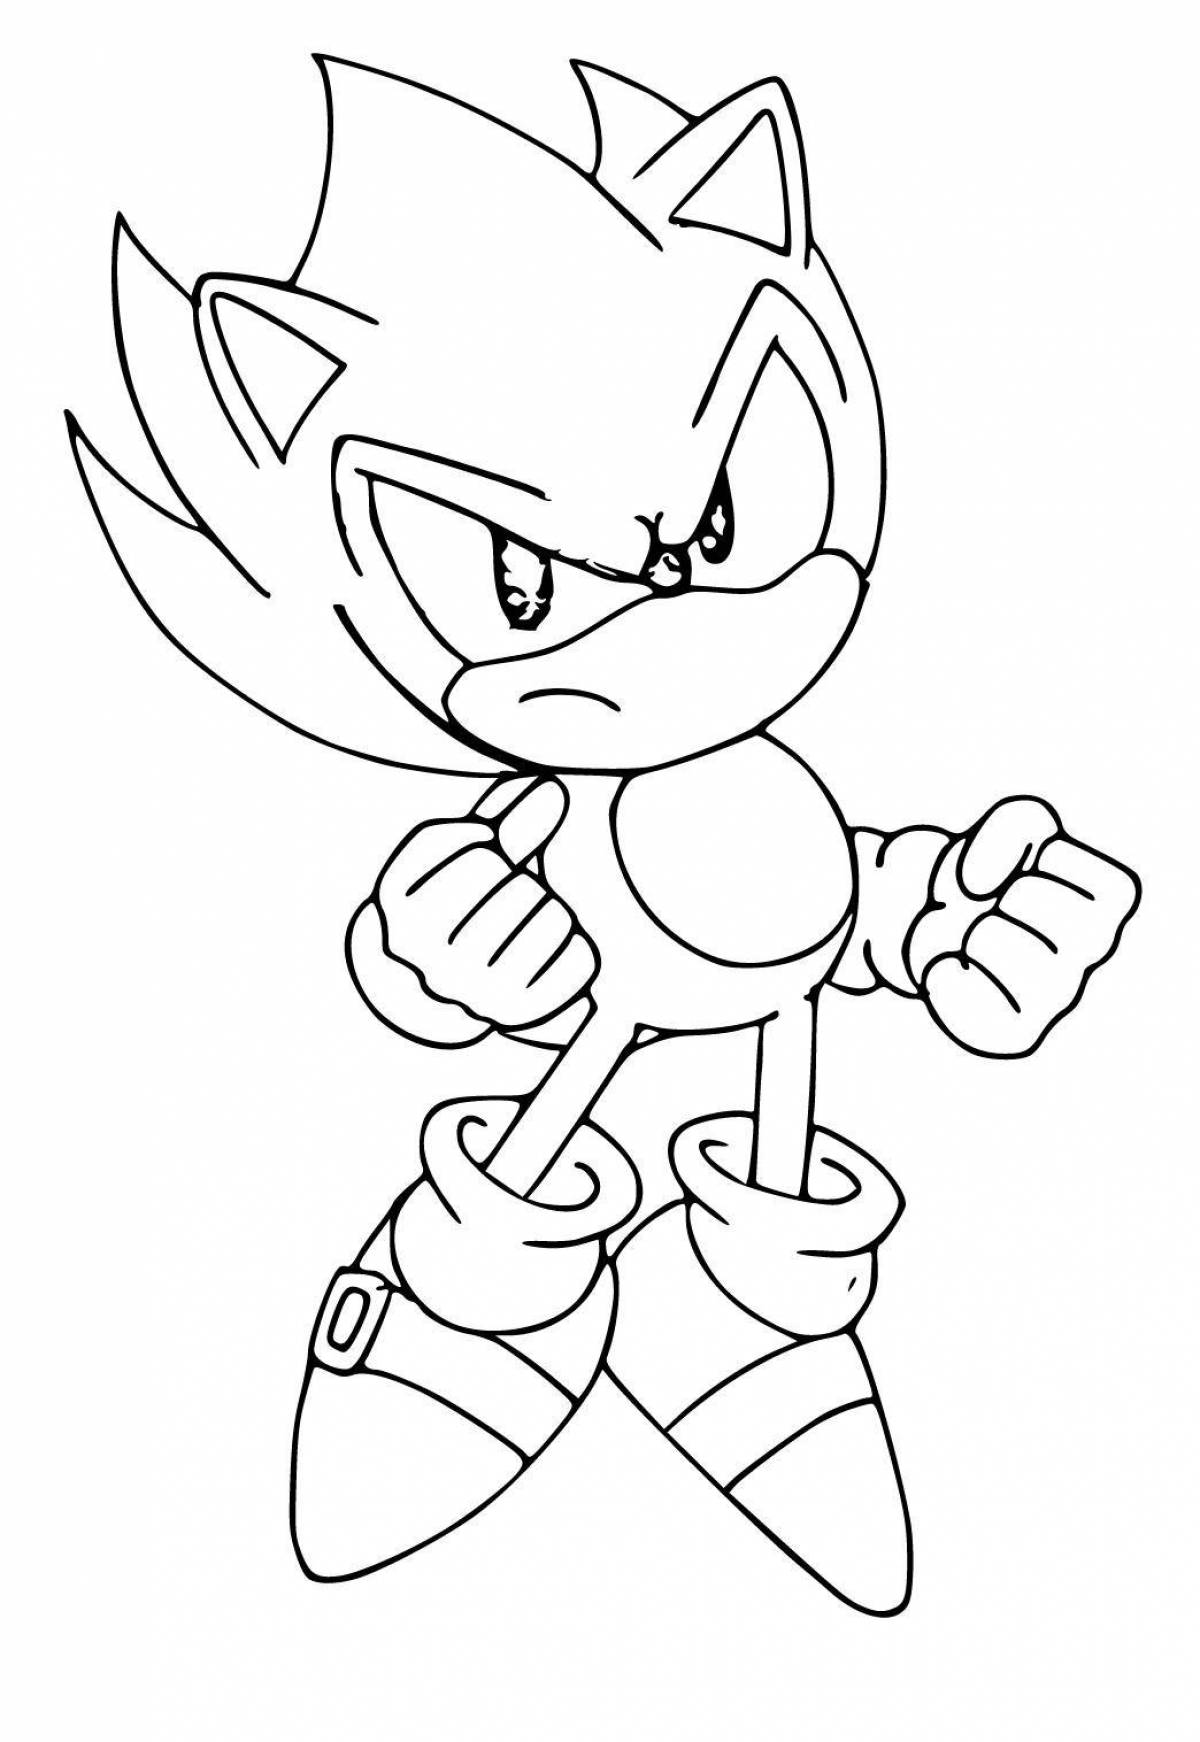 Funny sonic girl coloring book